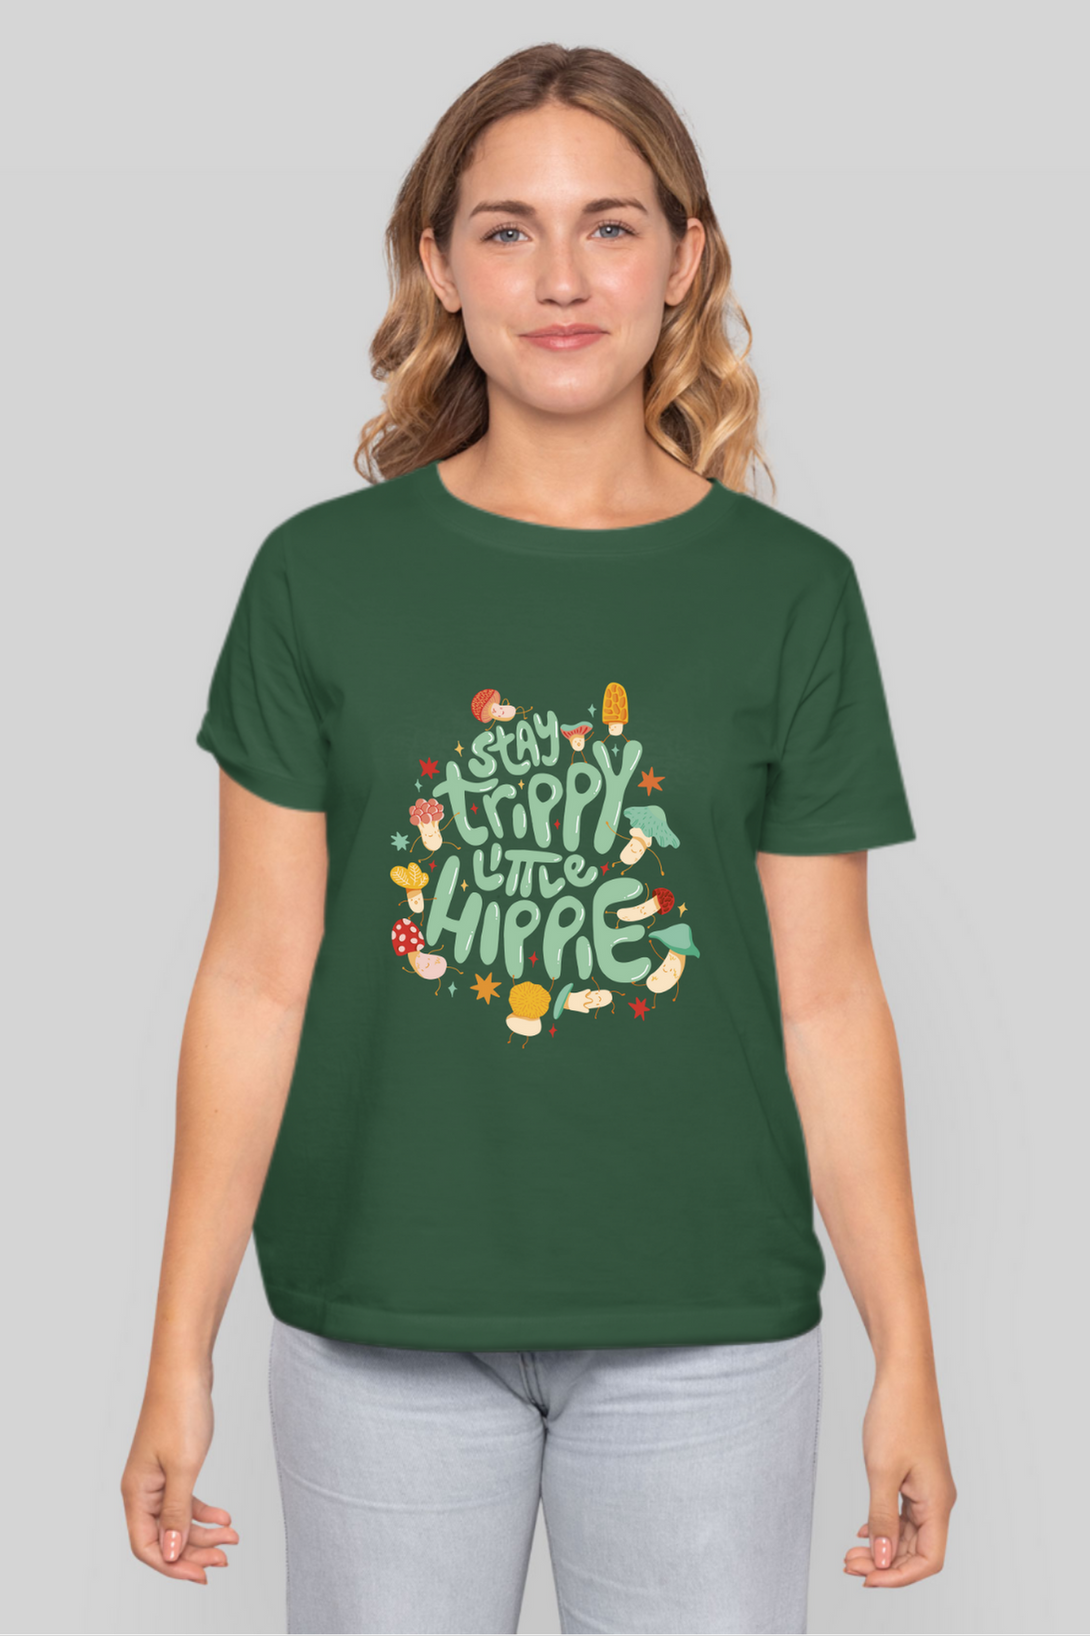 Stay Trippy Little Hippie Printed T-Shirt For Women - WowWaves - 8